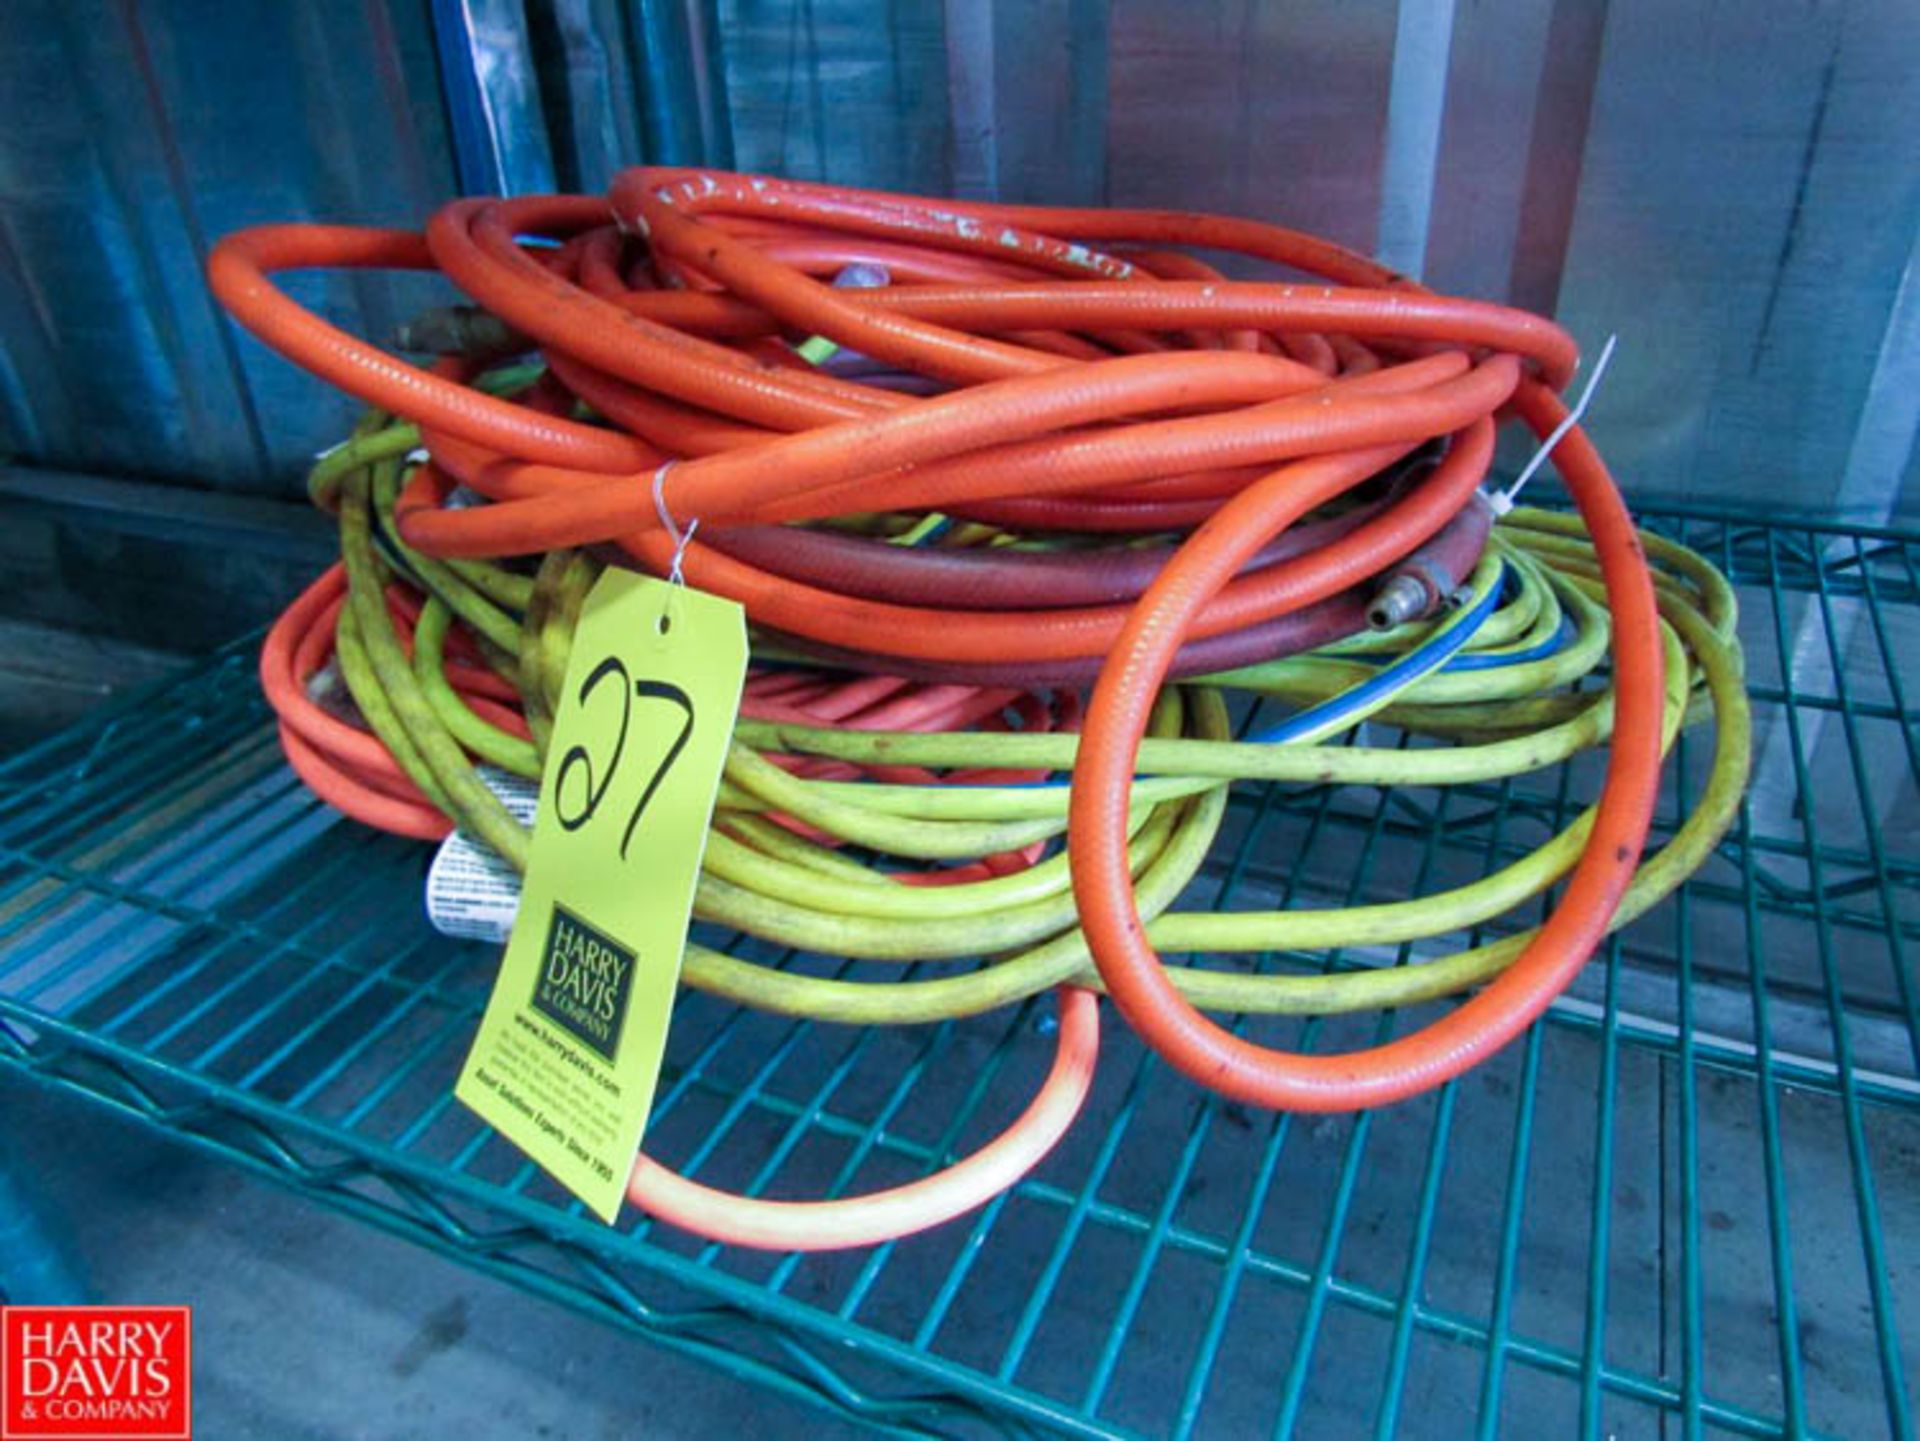 (2) Air Hoses & (2) Extension Cords Rigging Fee: $ 10